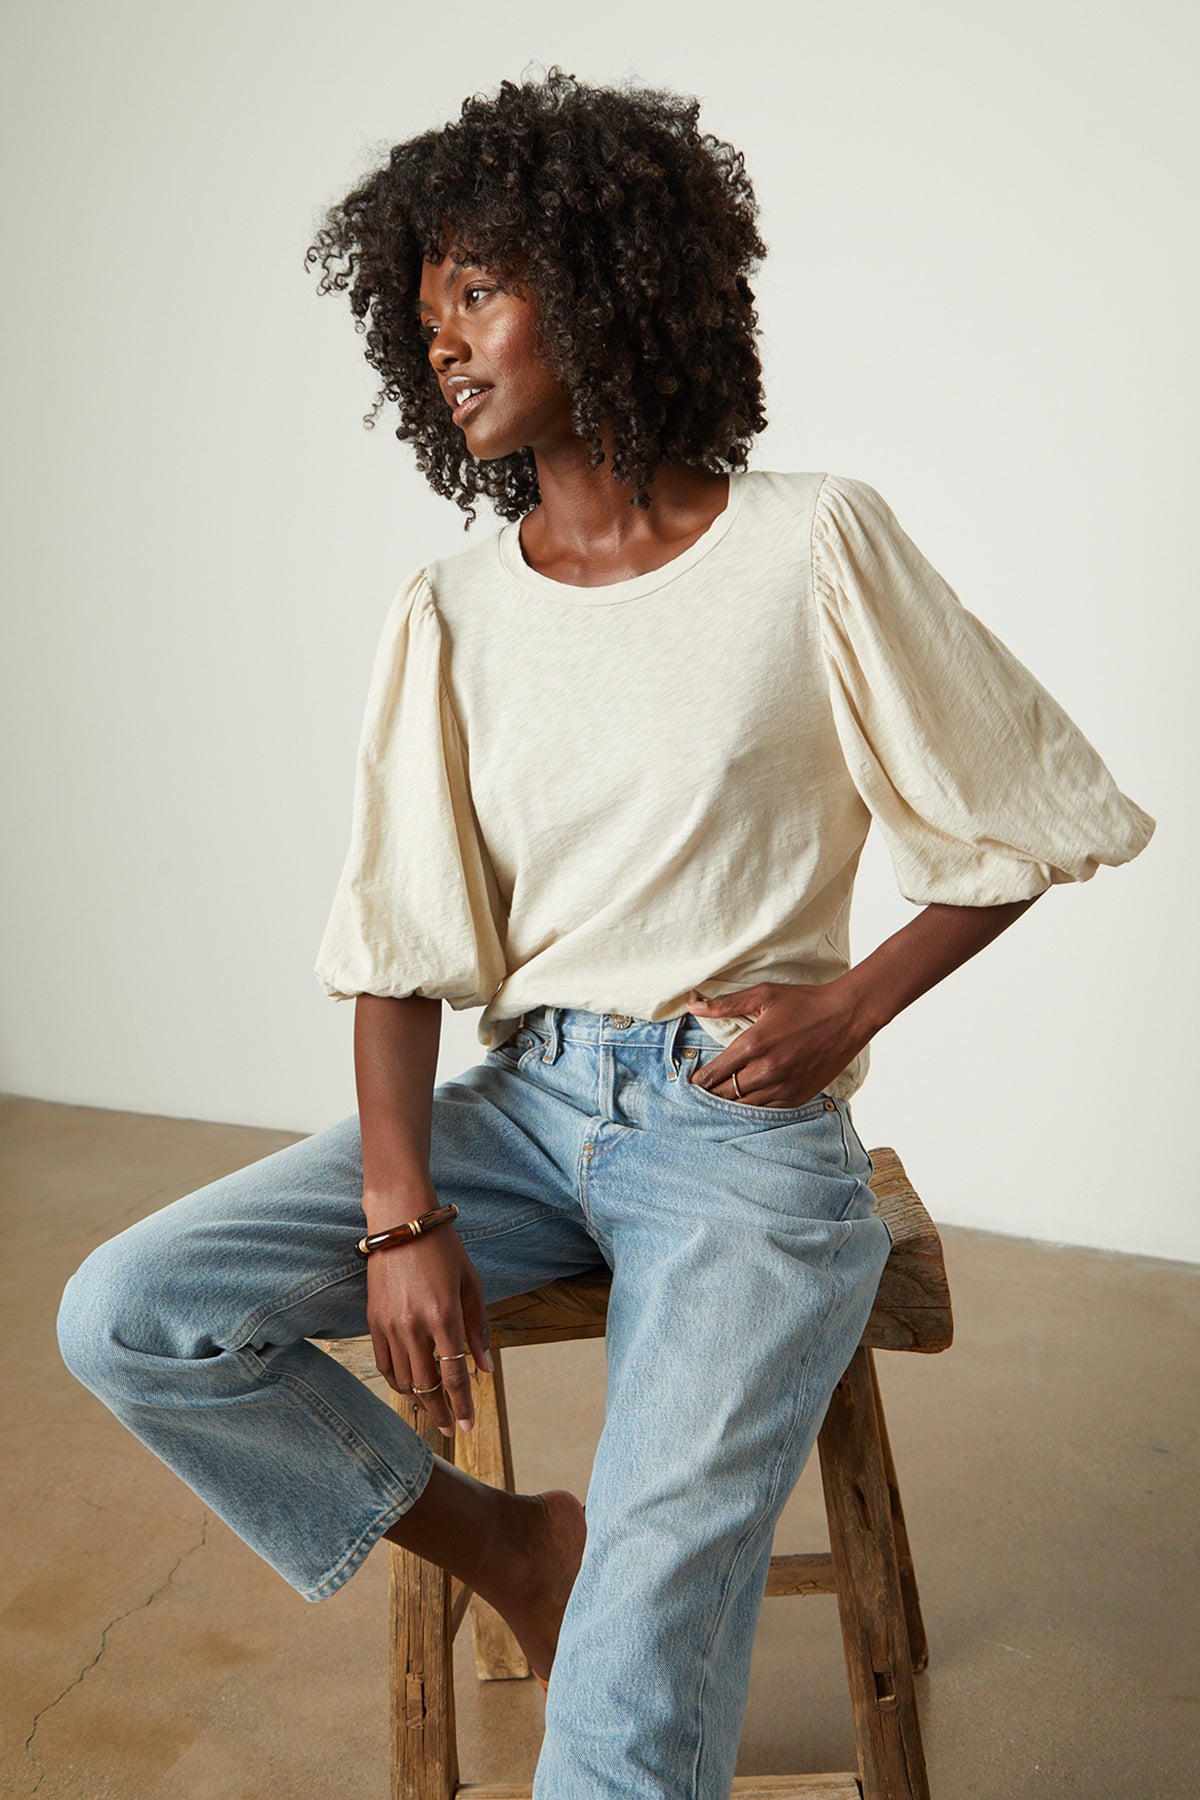   A woman is sitting on a stool wearing UMA PUFF SLEEVE TEE by Velvet by Graham & Spencer, jeans, and a blouse. 